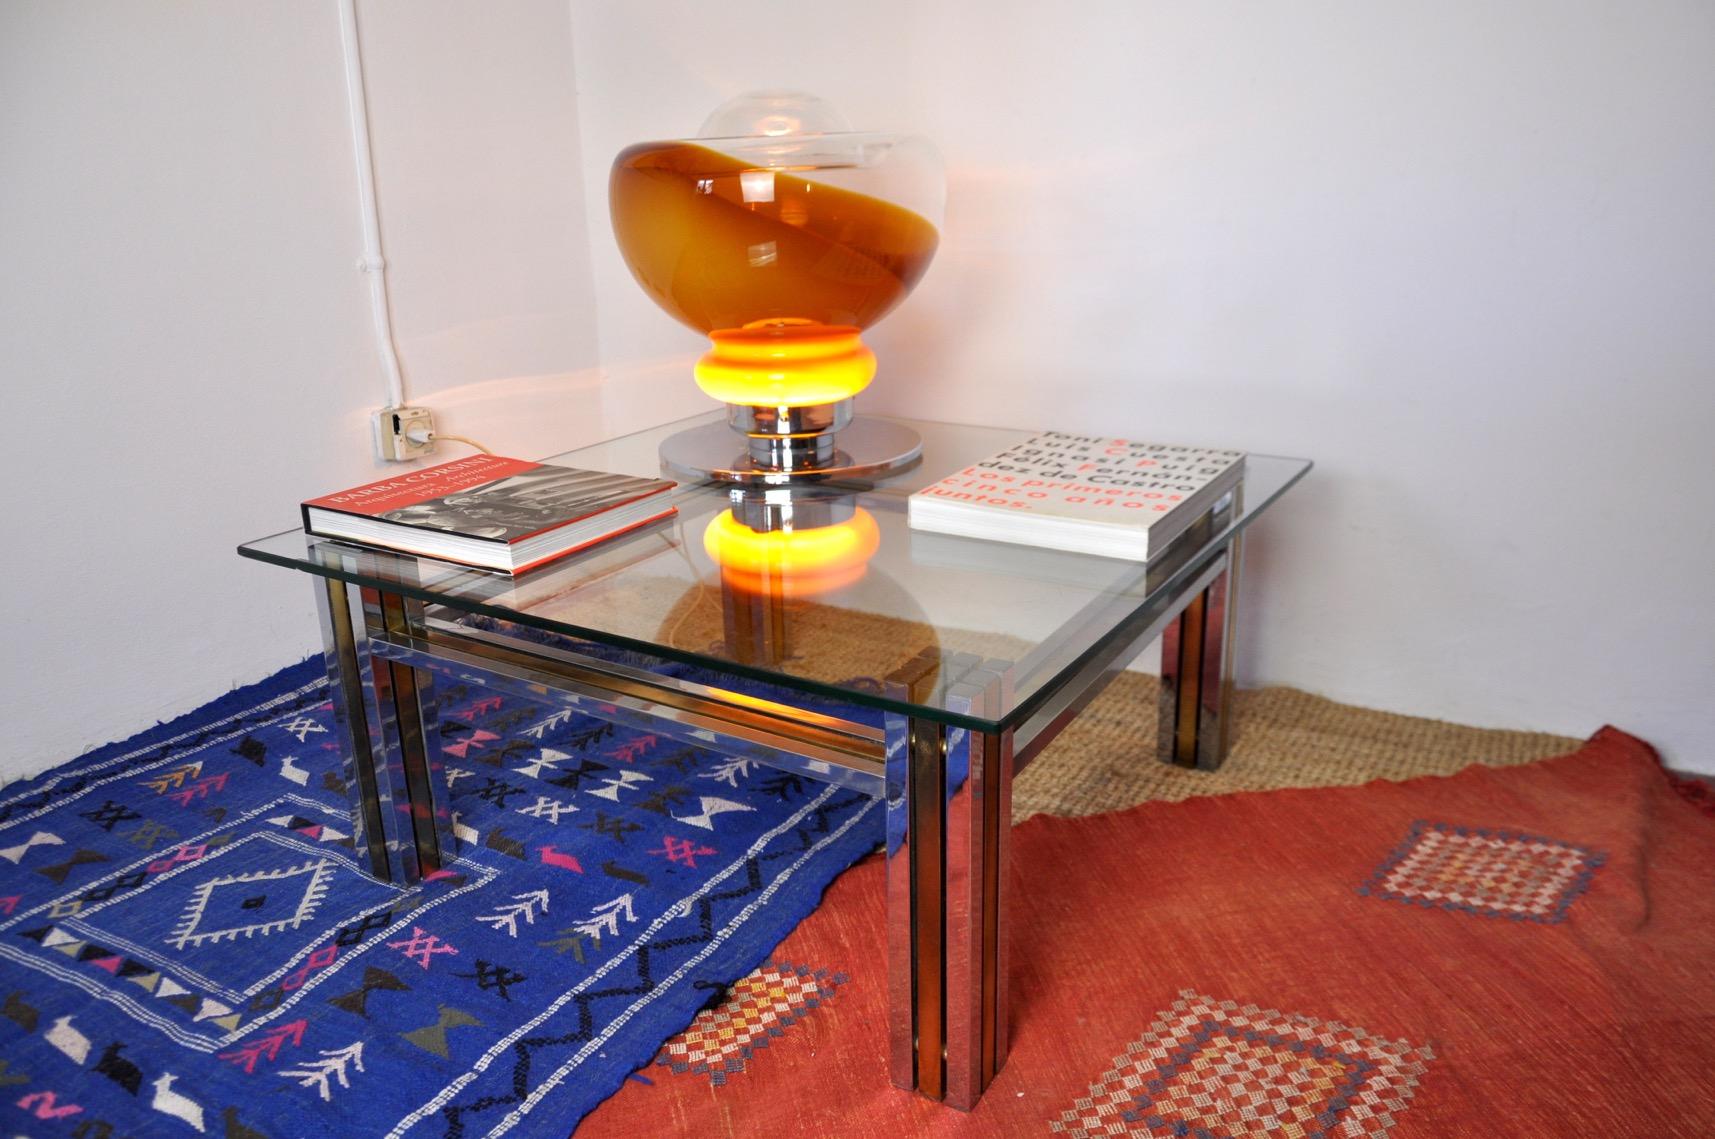 Superb coffee table in the style of romeo rega, designed and produced in italy in the 70s. Unique object that will decorate and bring a real design touch to your interior. Time mark relating to the age of the object, small damage to the glass, see